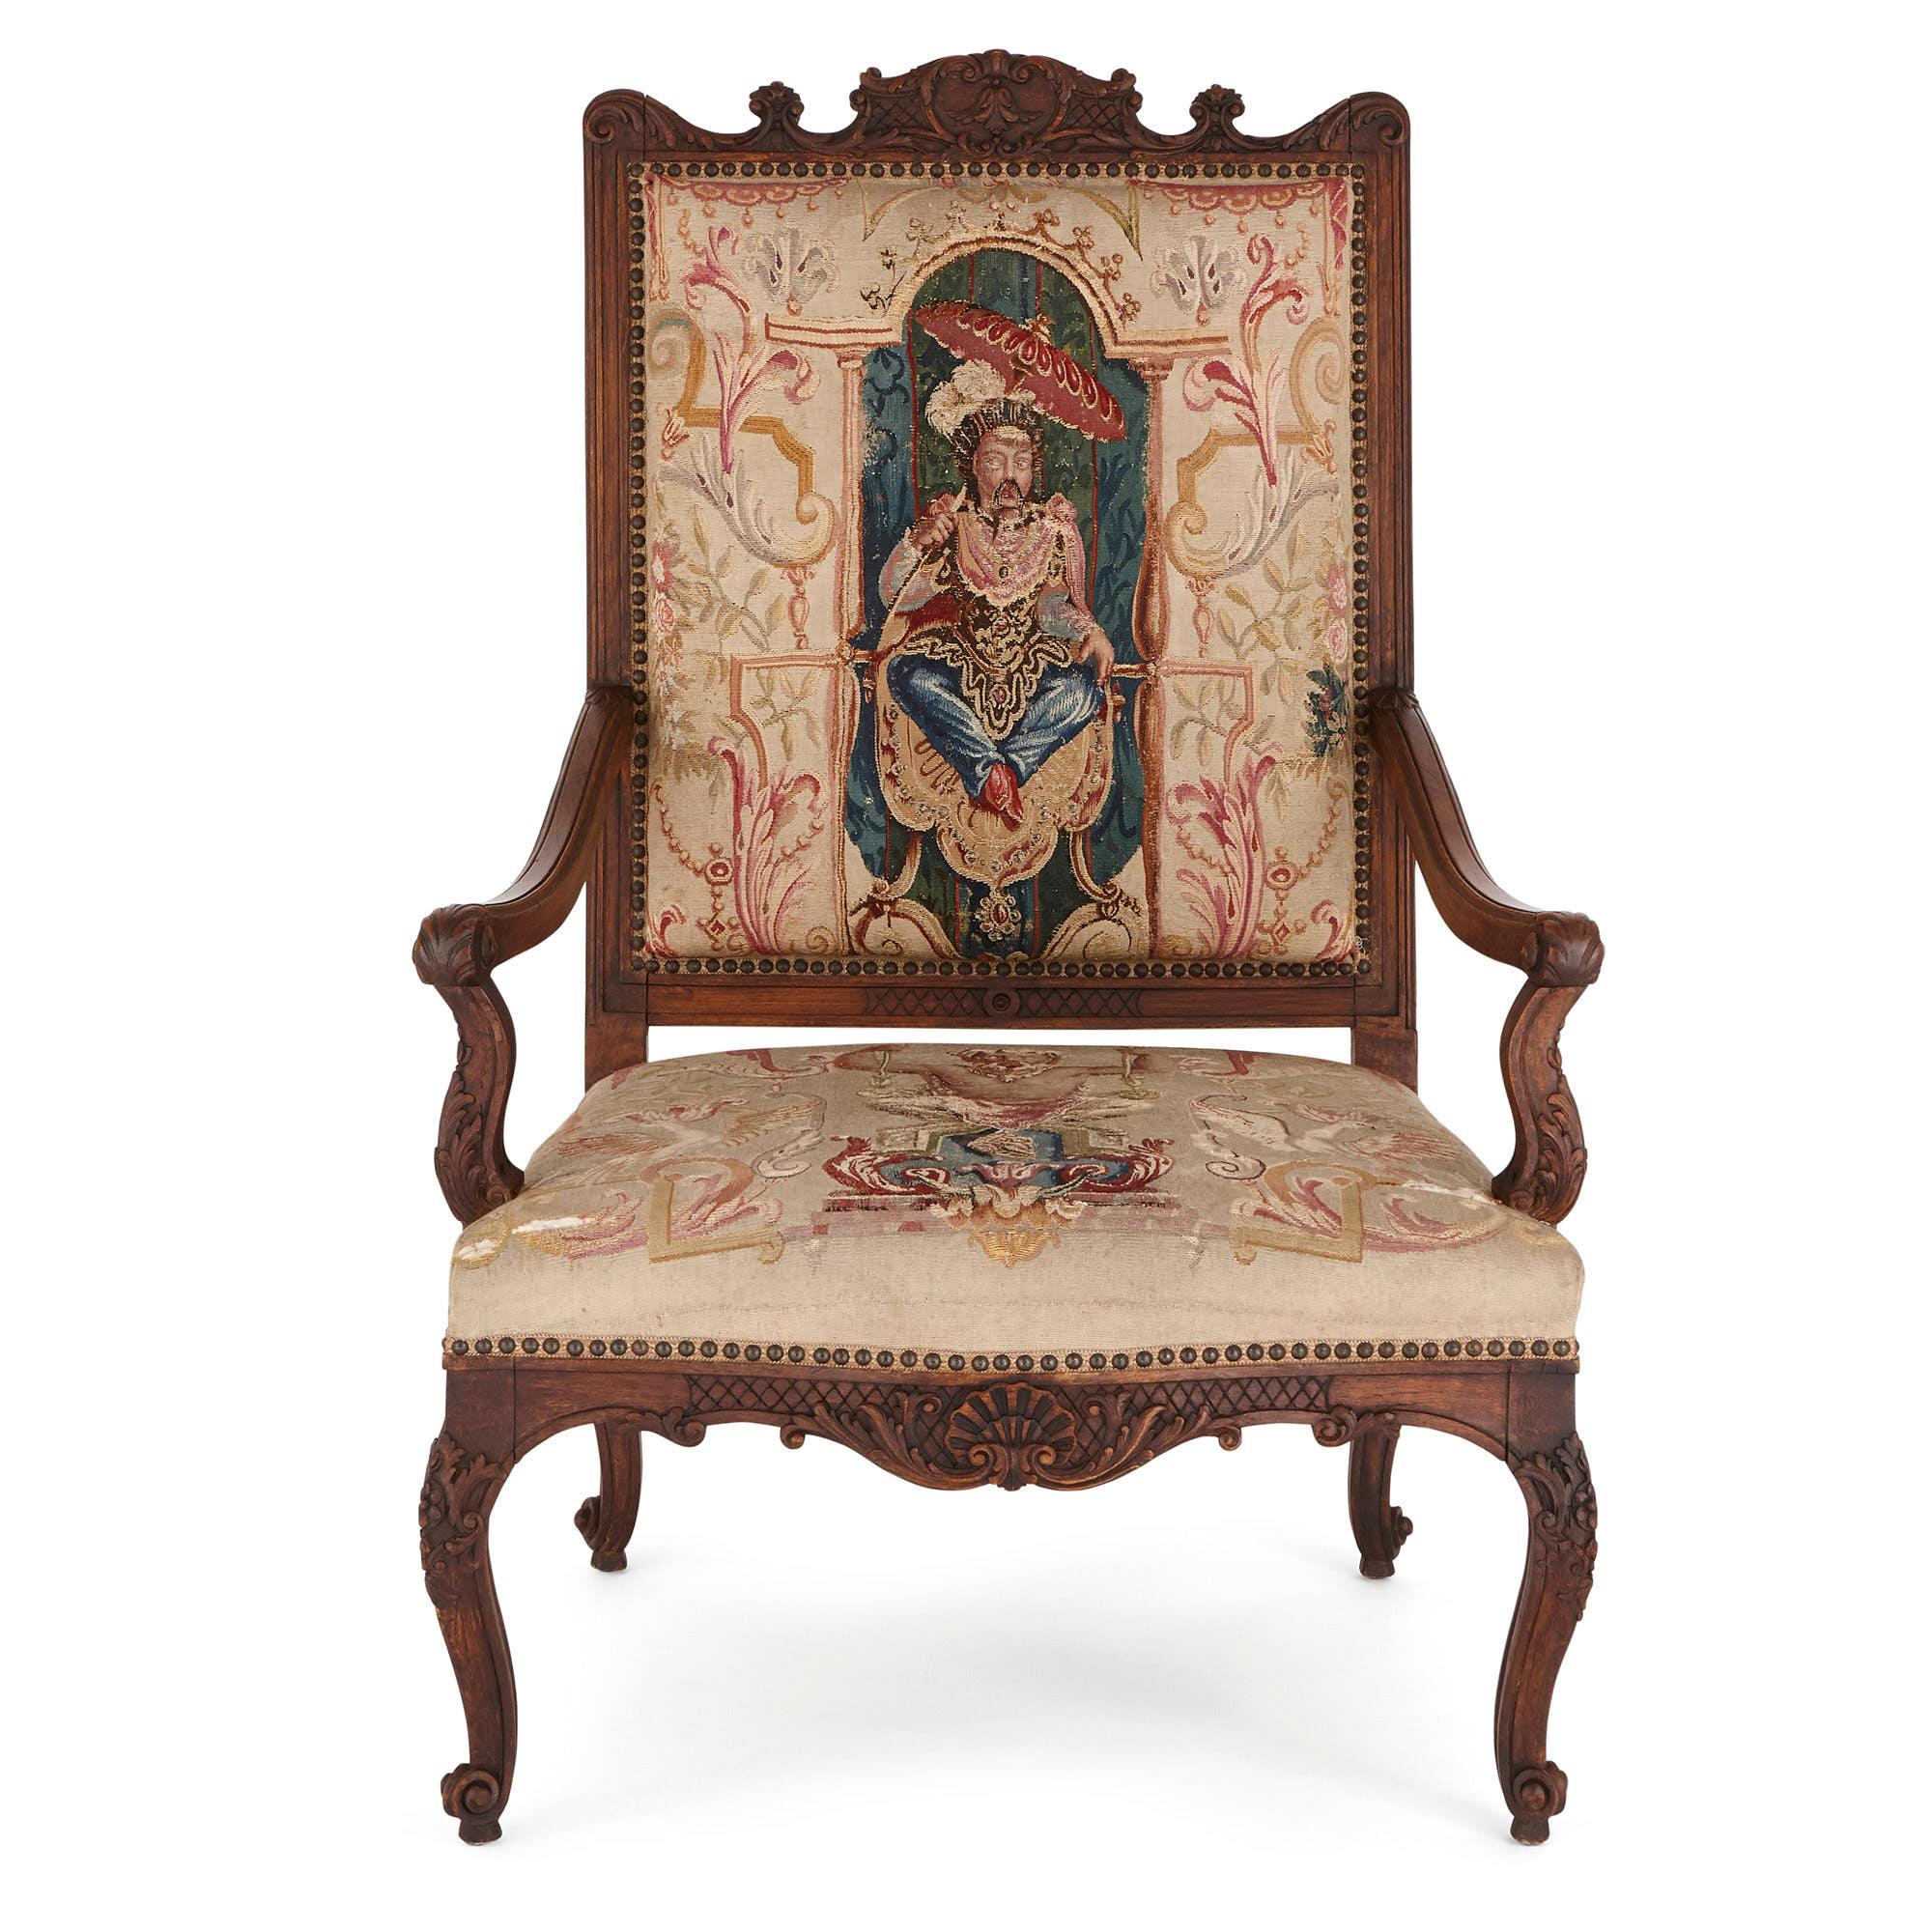 This five-piece furniture suite is an elegant piece of early 18th-century French design. The suite, which is comprised of a canapé (sofa) and four fauteuils (armchairs), is crafted from carved beech wood and Beauvais tapestry. 

Beauvais in France